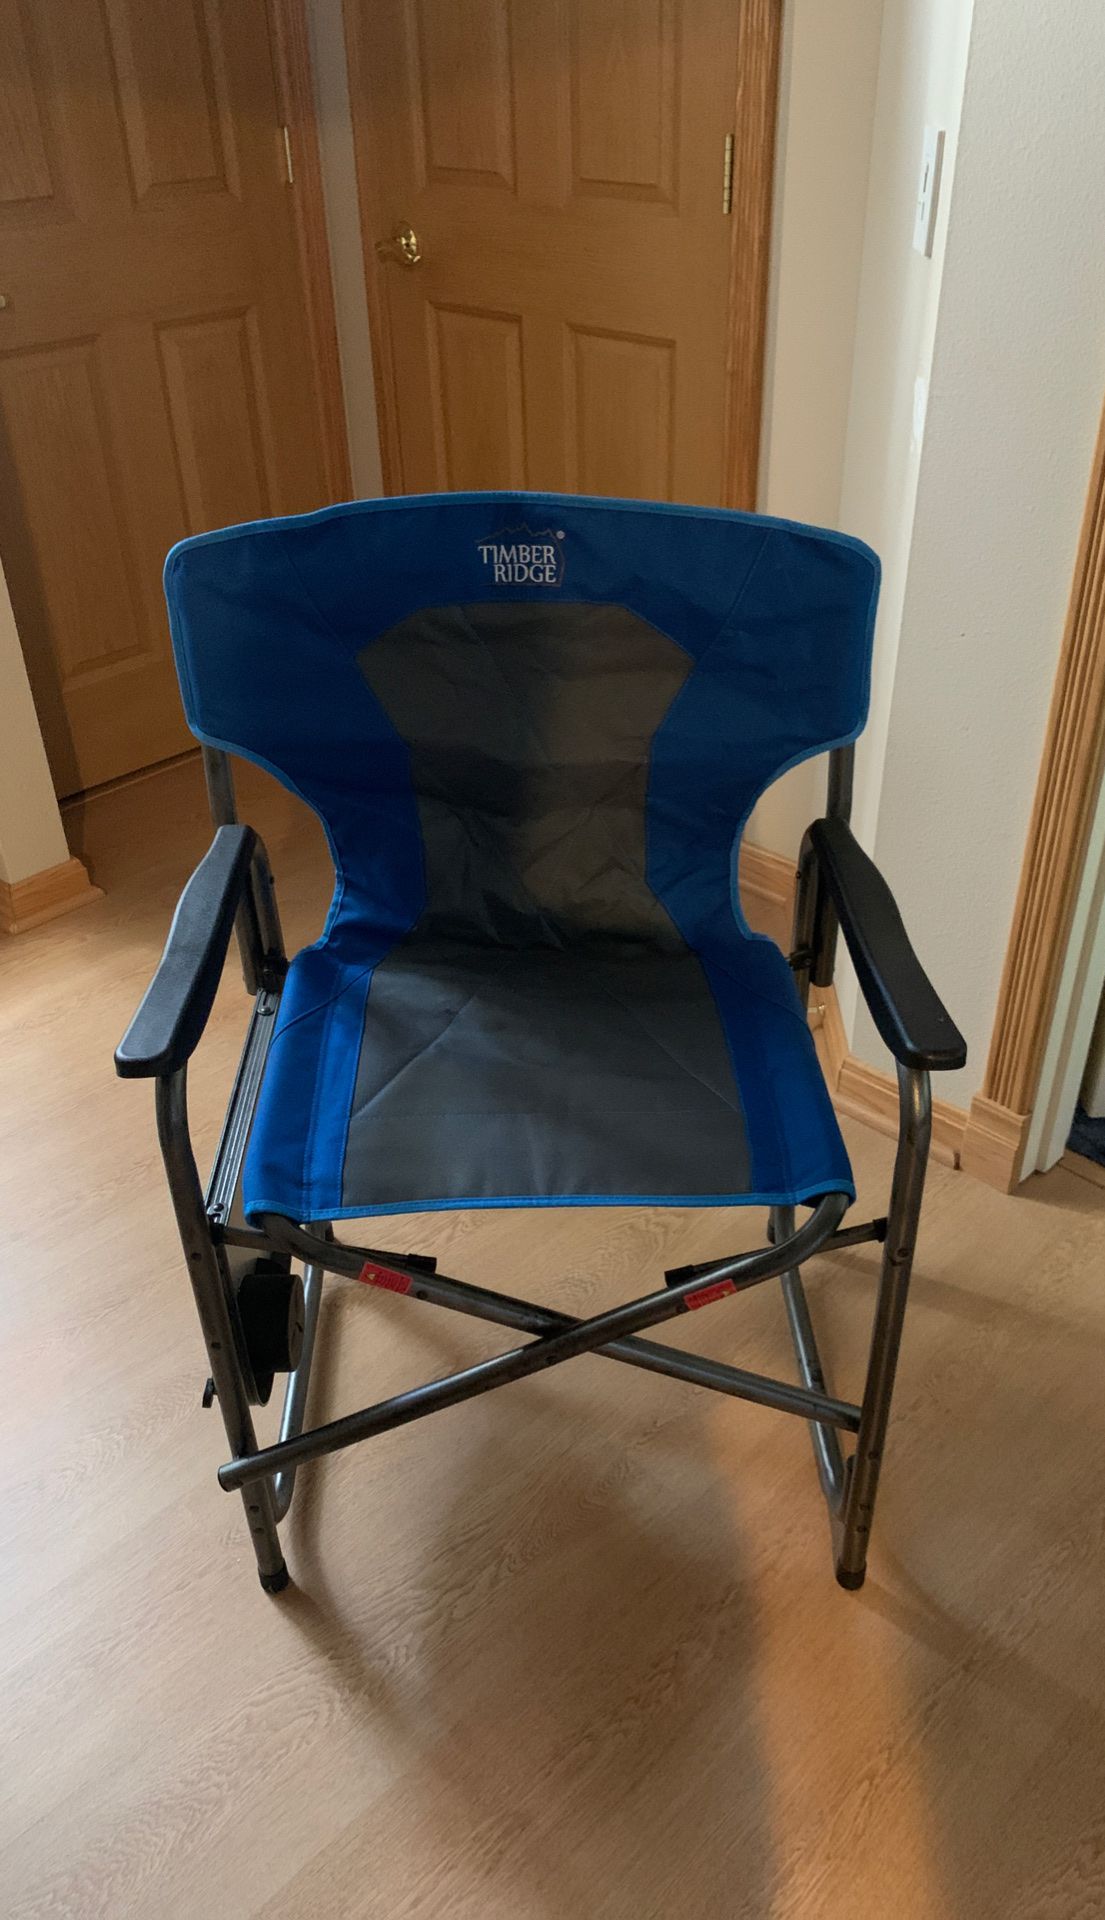 Brand new camping chair